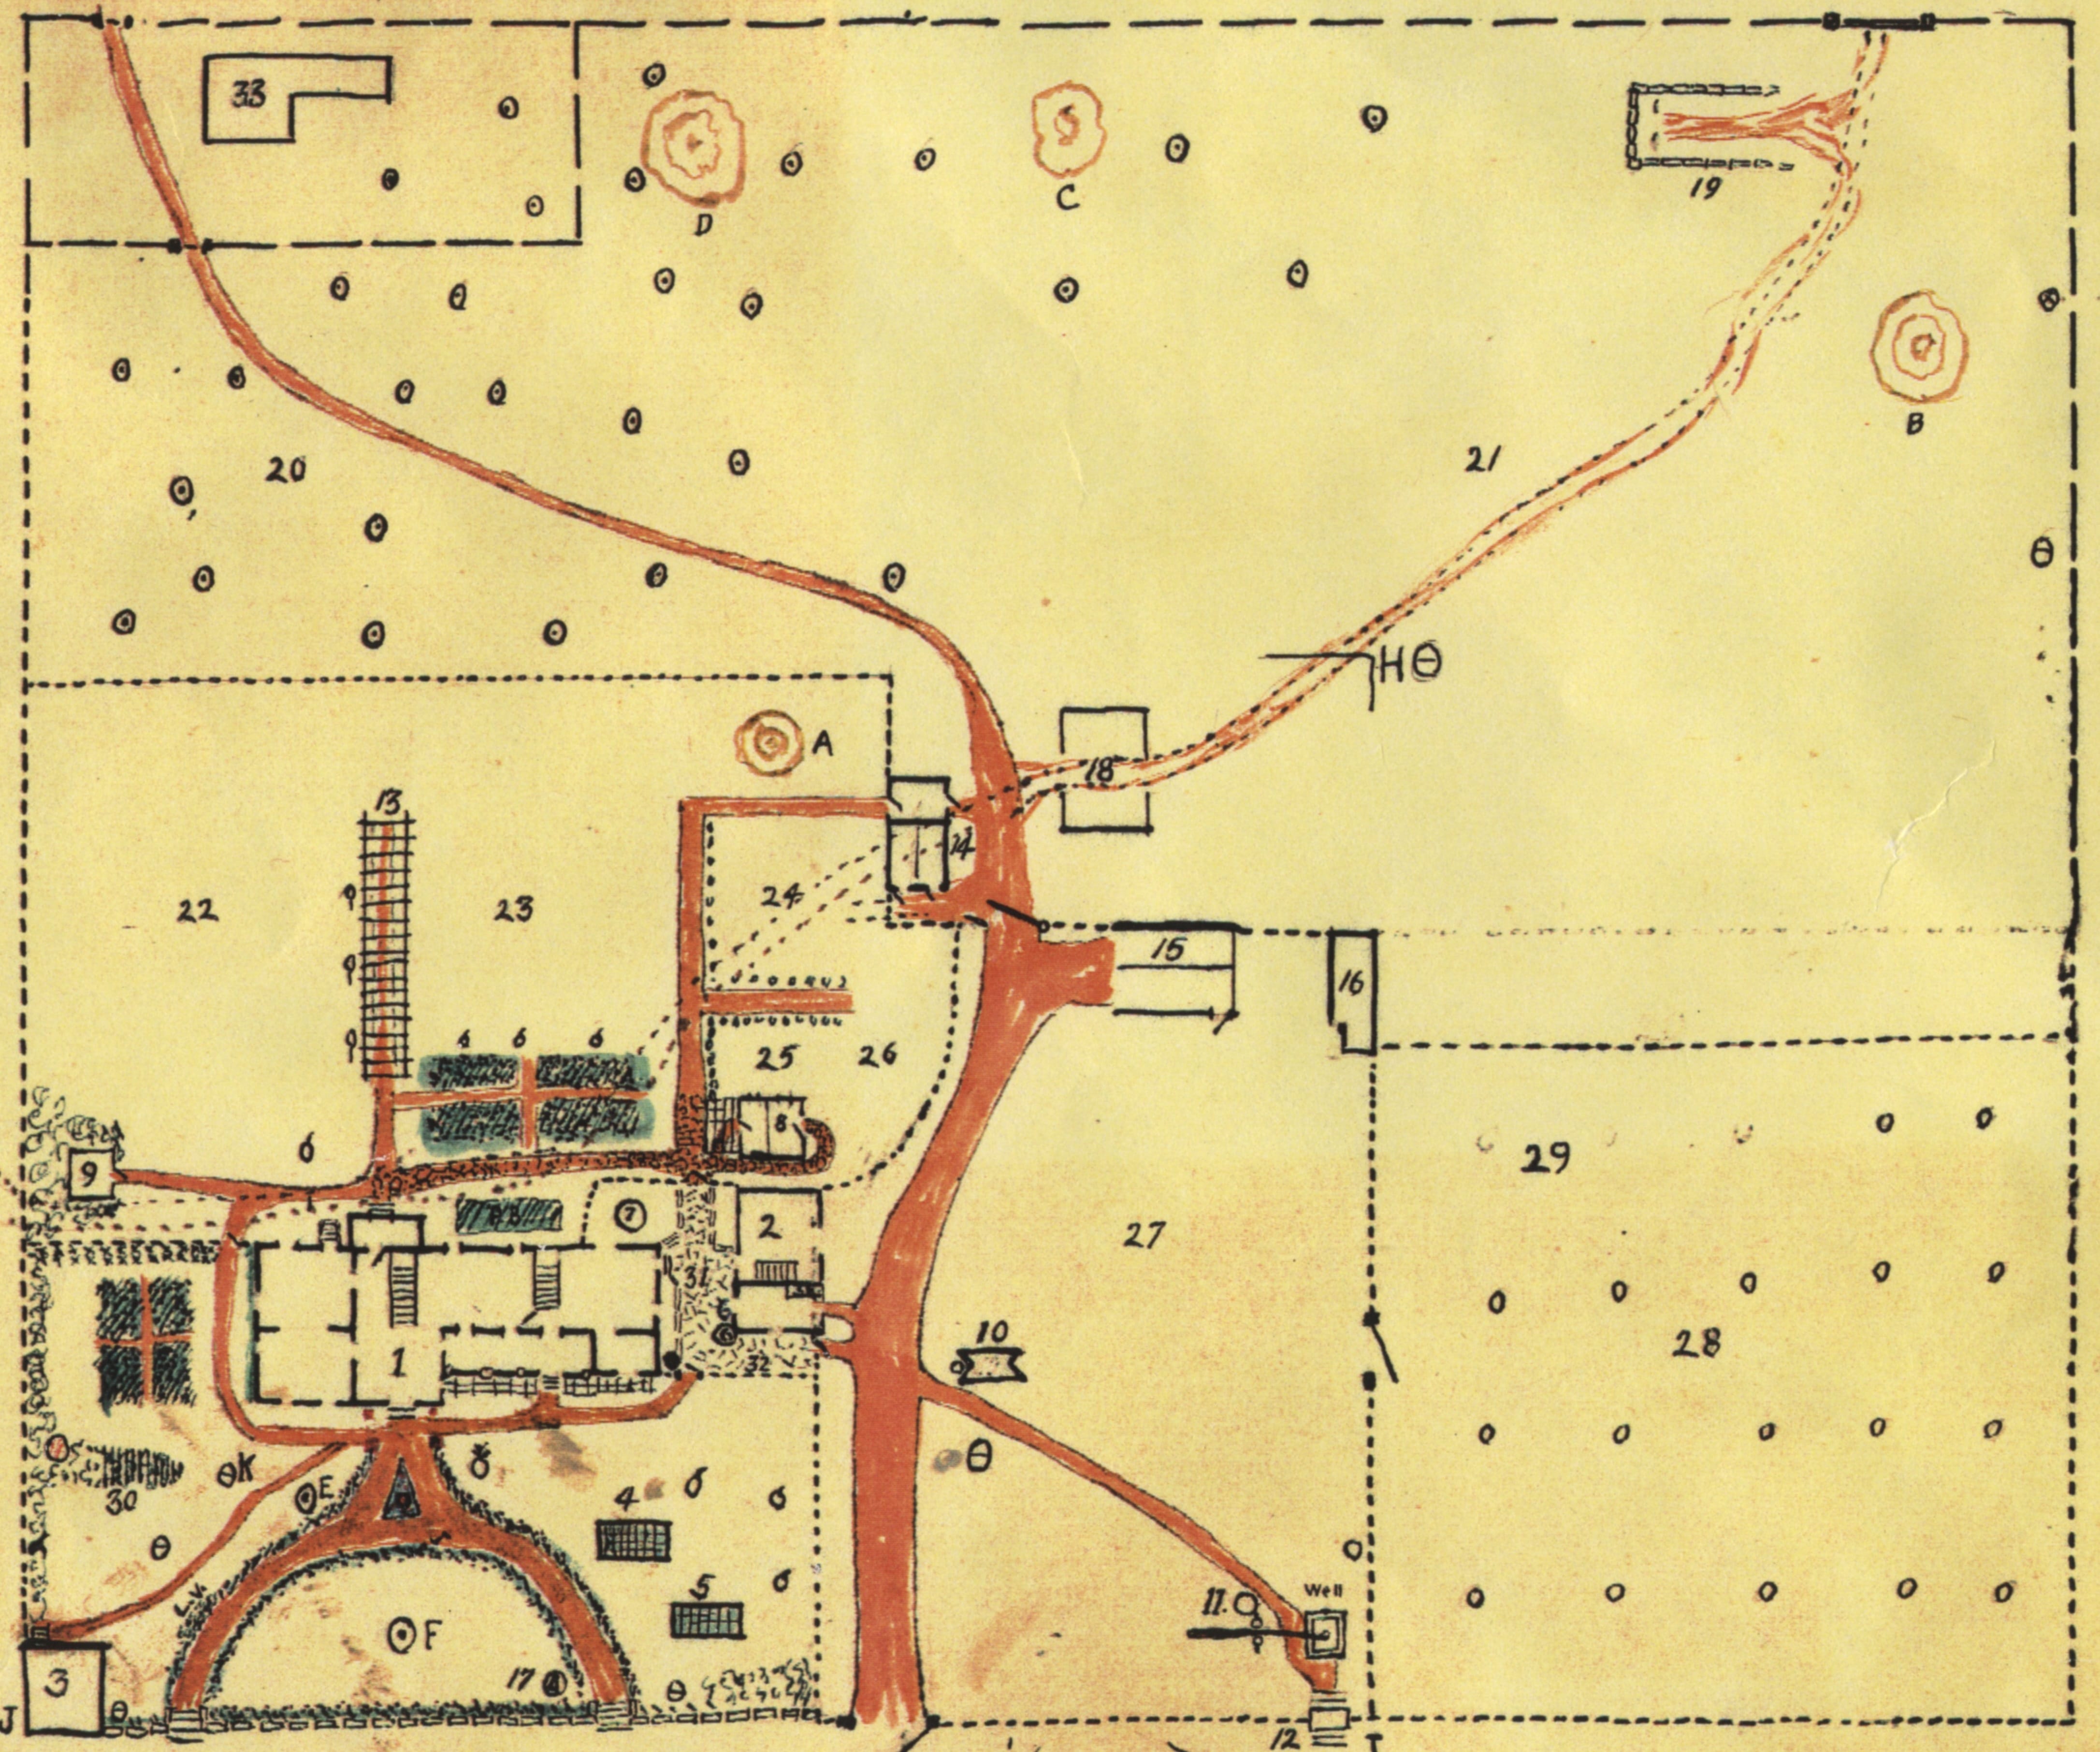 Hand-drawn map showing an overhead view of the Wylie homestead.